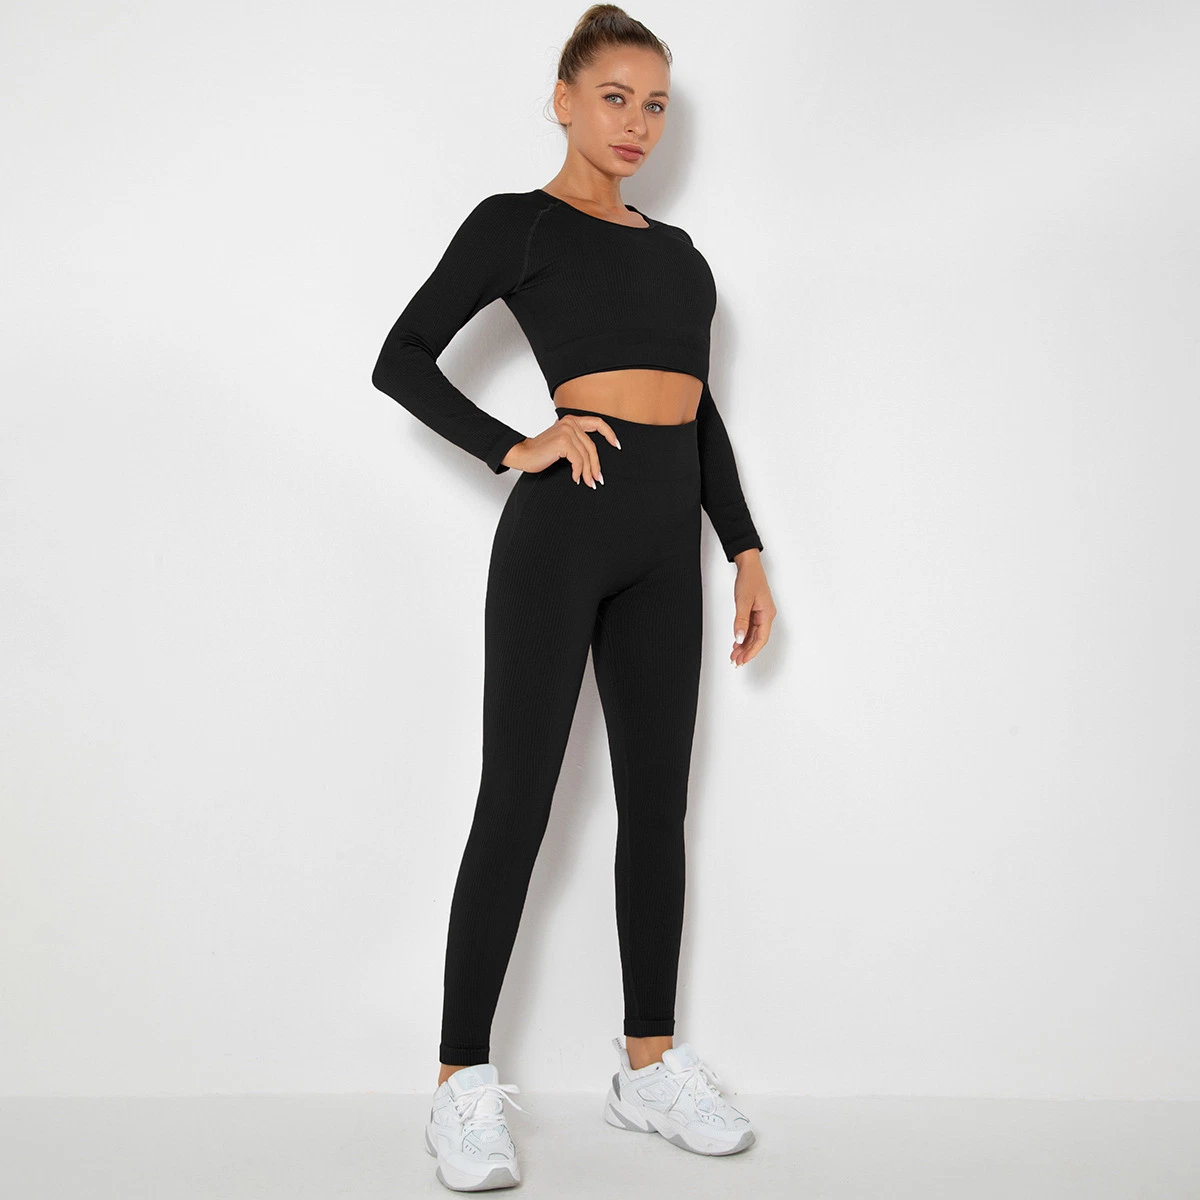 Long Sleeves Active Wear Ribbed Fabric Tracksuit Sexy Fitness Clothing for Women